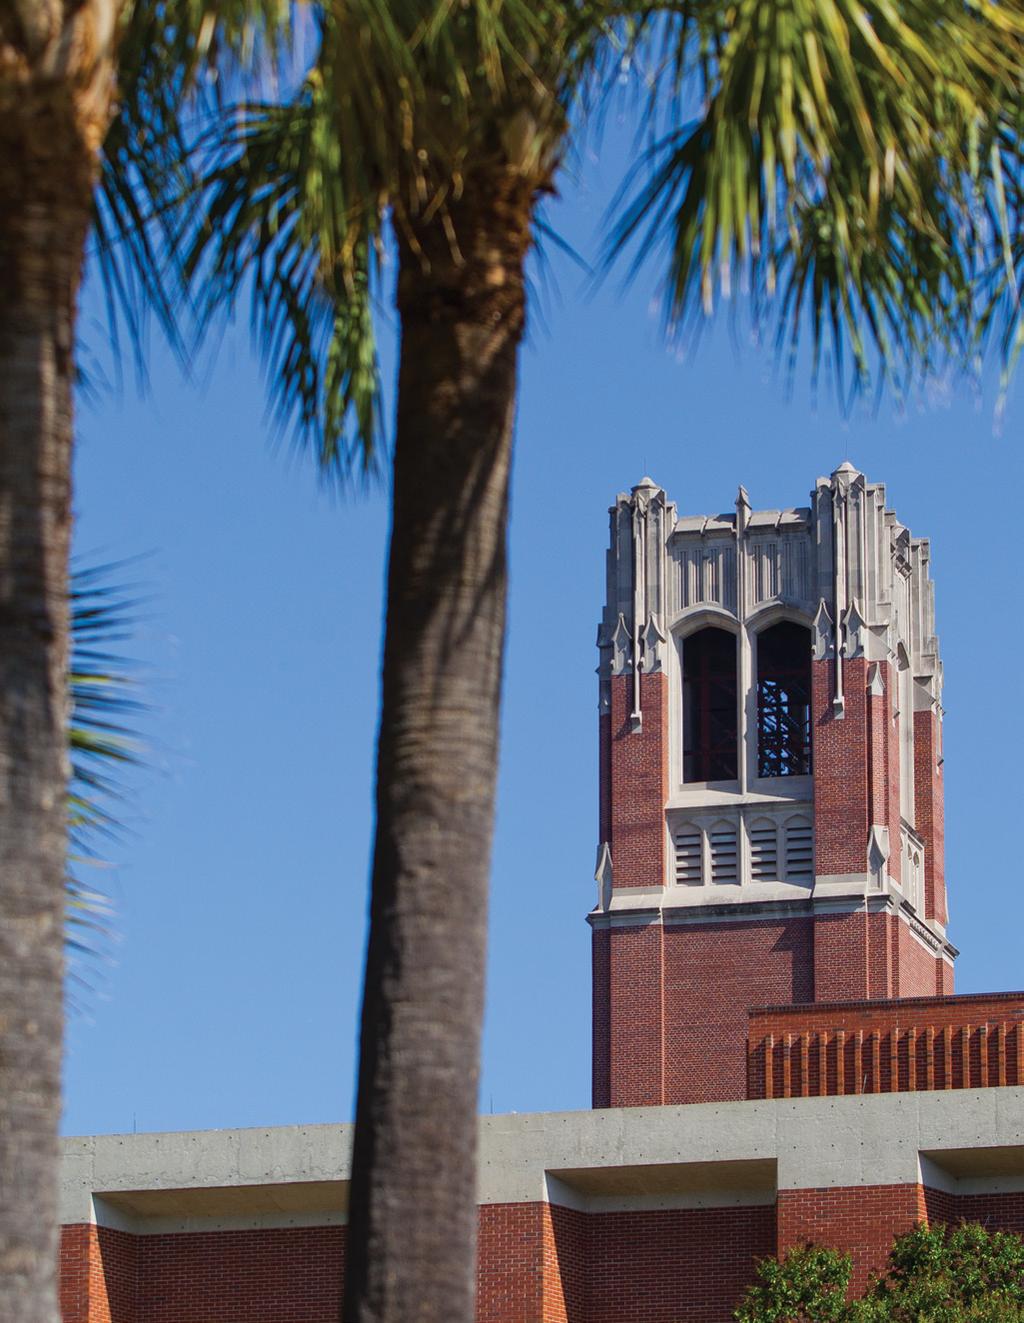 ABOUT THE UNIVERSITY OF FLORIDA IN GAINESVILLE, FLORIDA With an enrollment of nearly 50,000 students annually, UF is home to 16 colleges and more than 150 research centers and institutes.